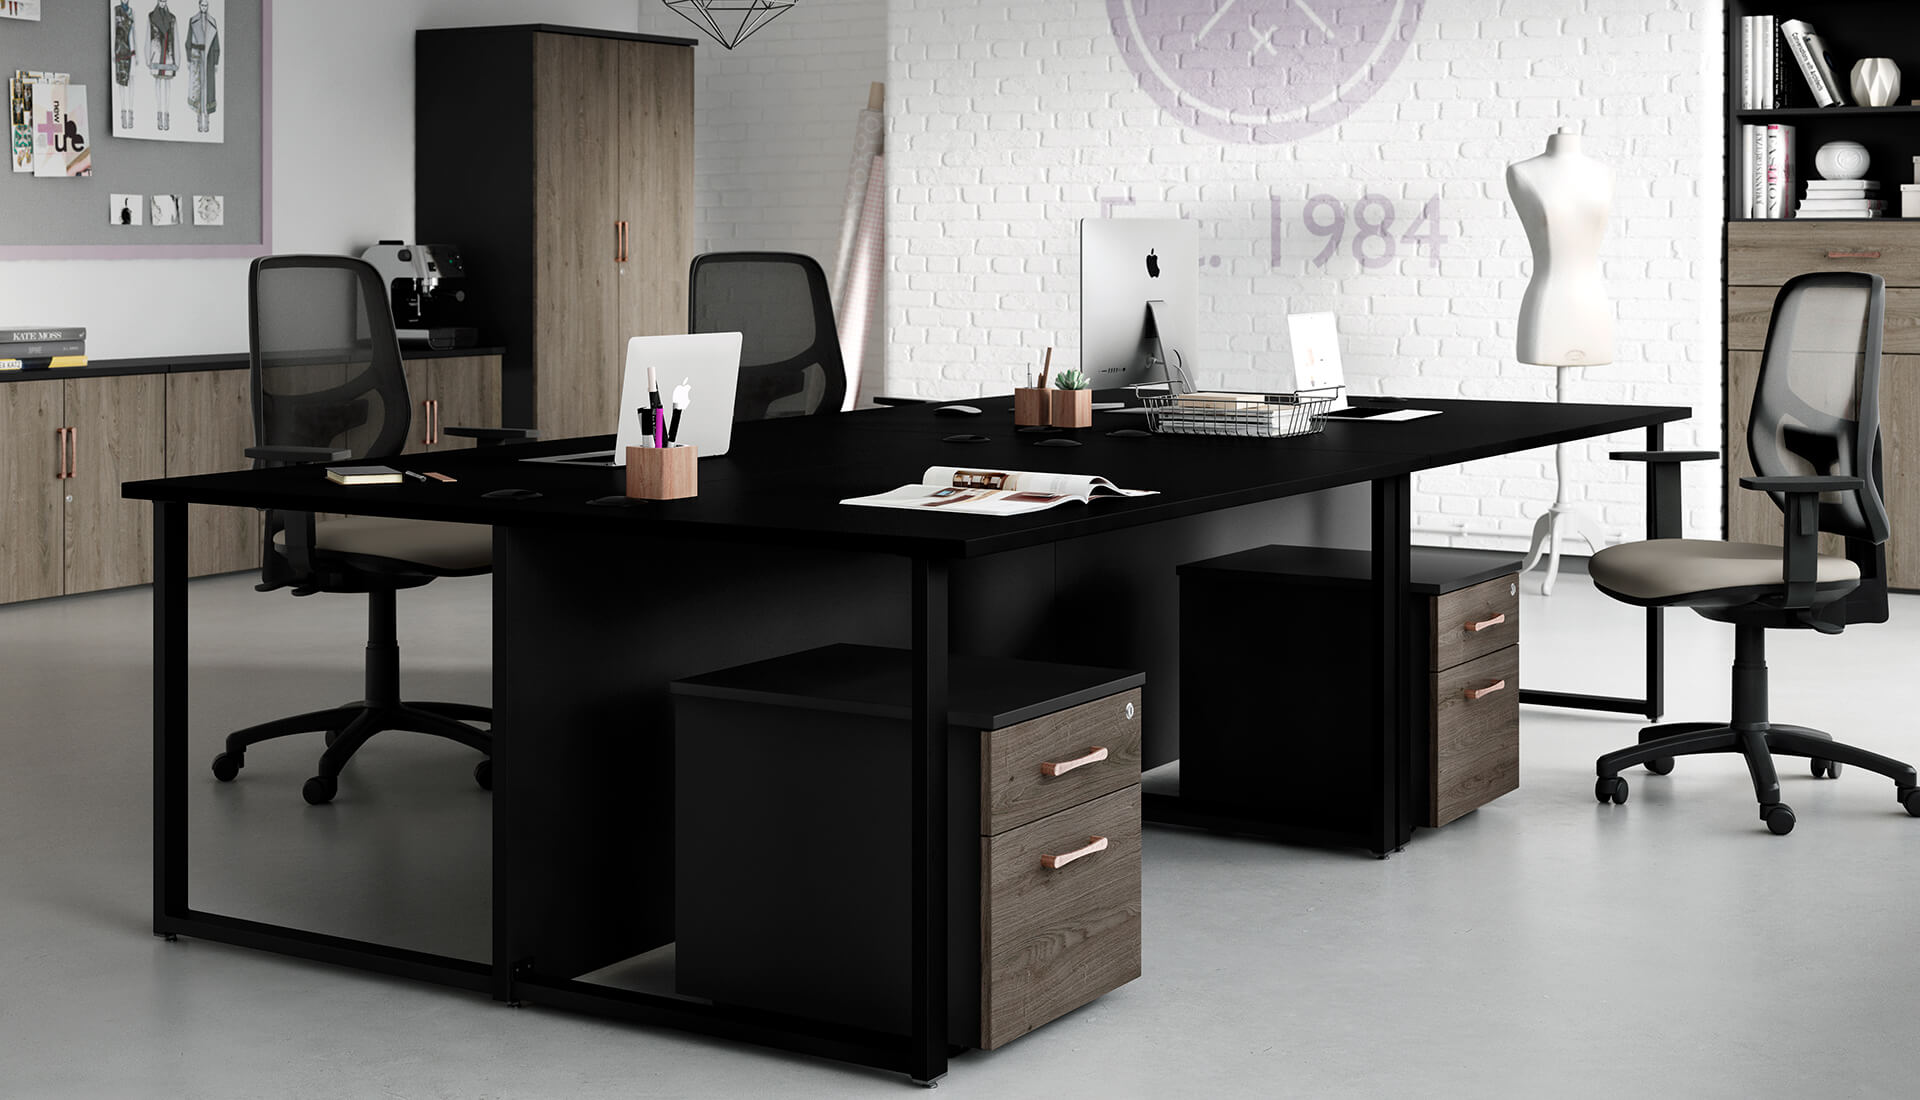 How Can Office furniture Boost The Moral In The Workplace?